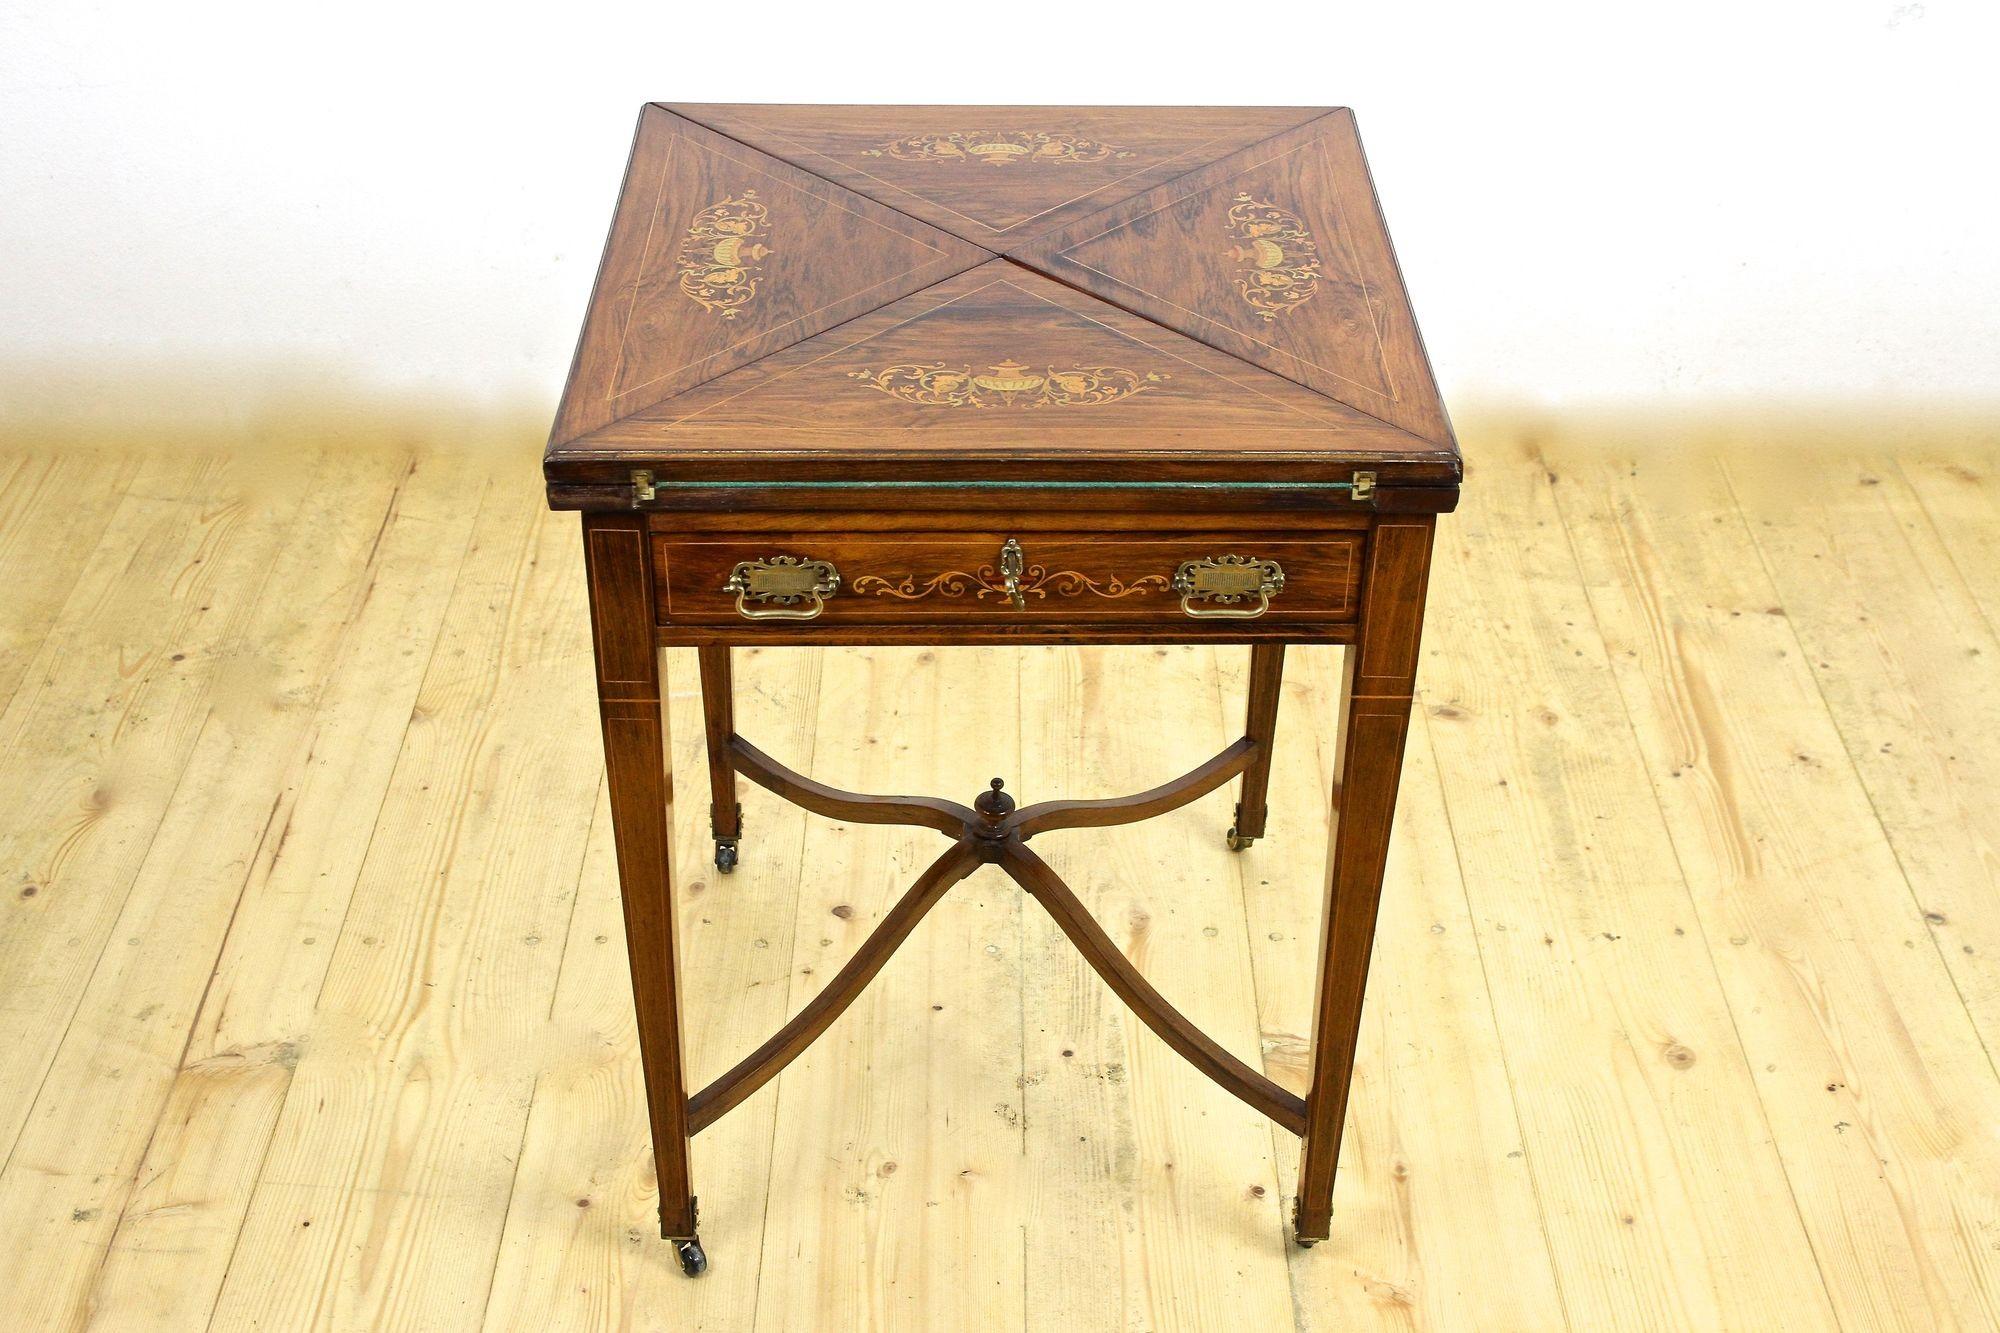 Absolutely beautiful, rare late 19th century victorian game table or side table from the famous company of James Shoolbred & Co in Great Britain. James Shoolbred & Co, also known as Jas Shoolbred, was established in the 1820s as a drapers shop at